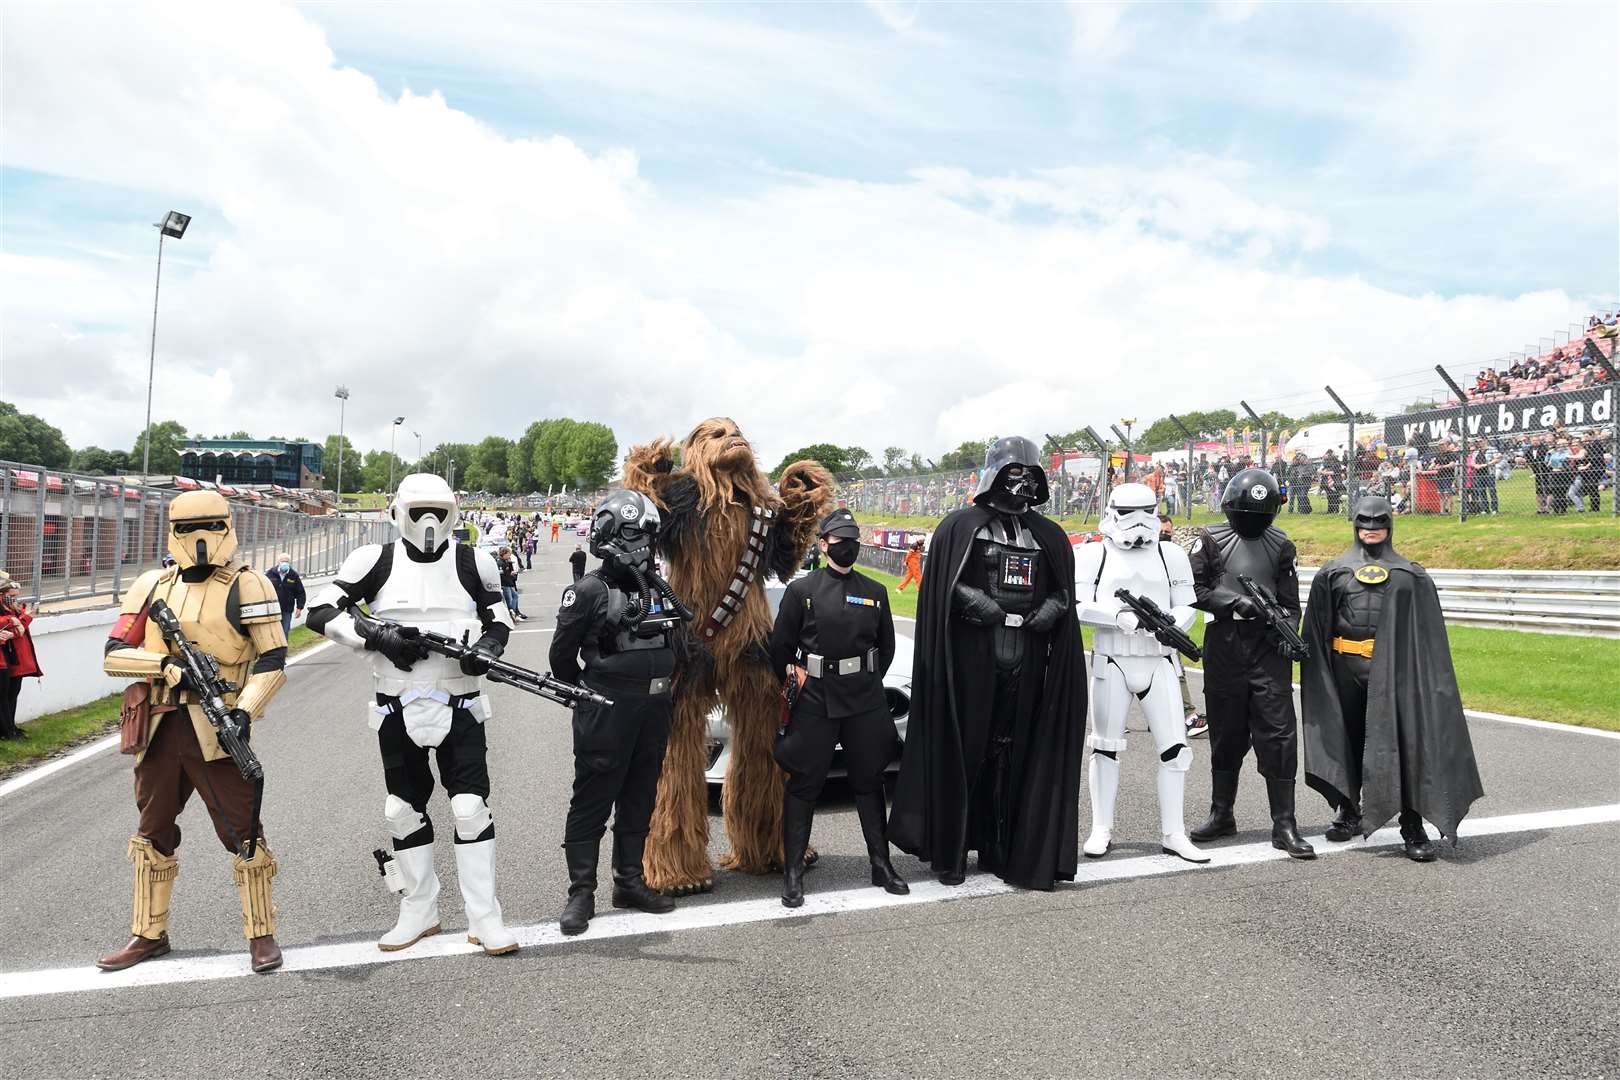 Star Wars characters and Batman on the grid for the opening ceremony, before the start of the NASCAR Whelen Euro Pro race Picture:Simon Hildrew